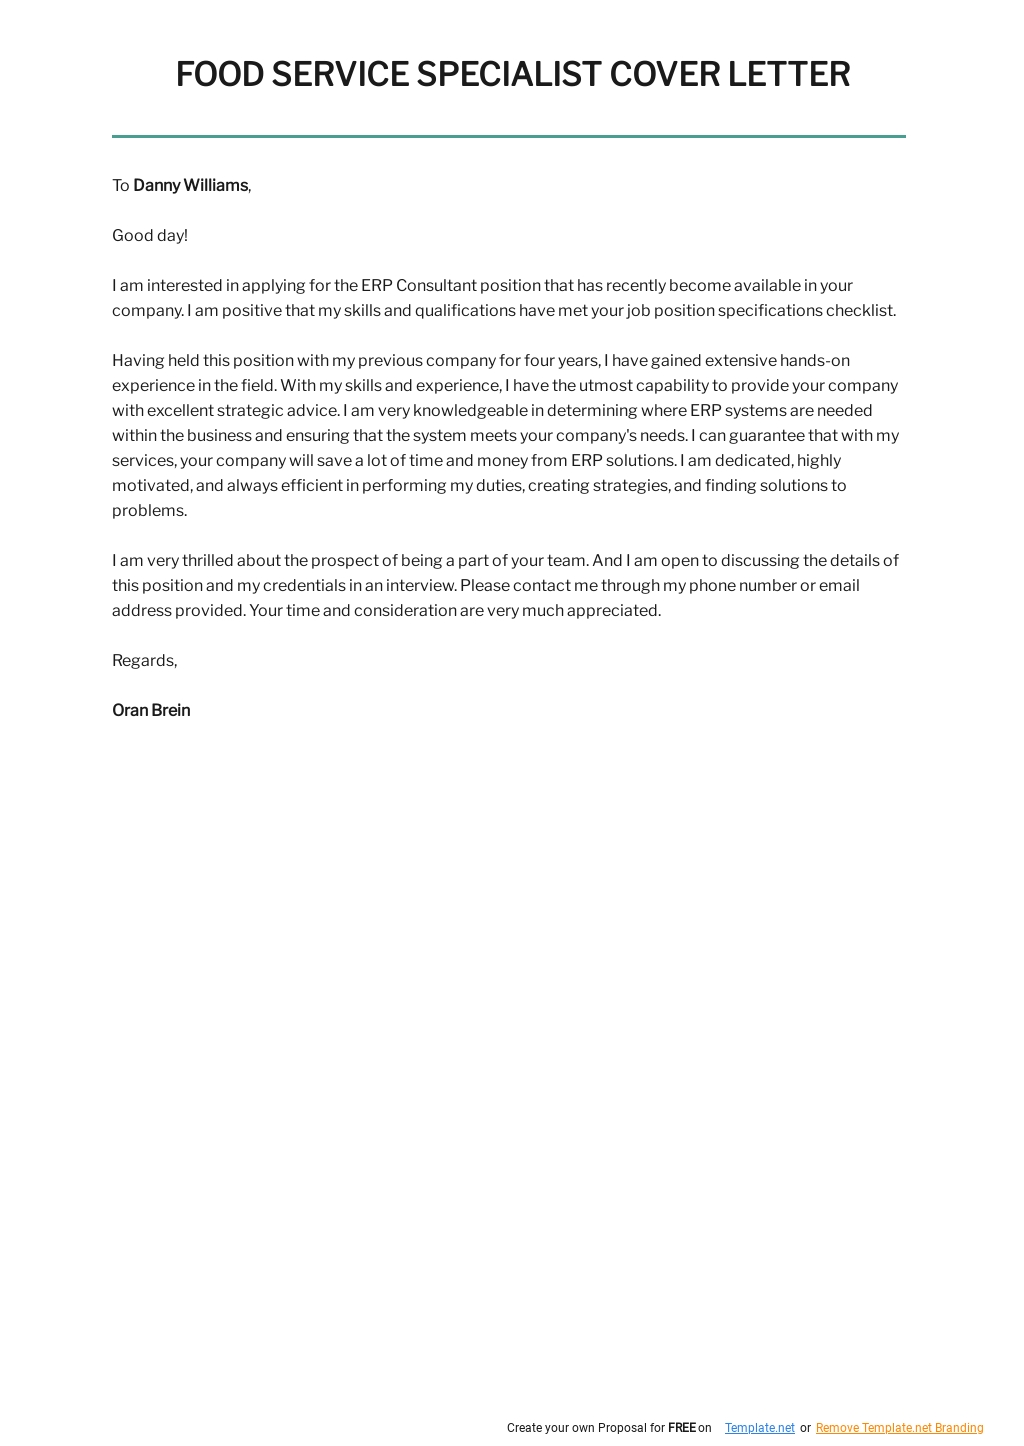 Food Service Specialist Cover Letter Template.jpe